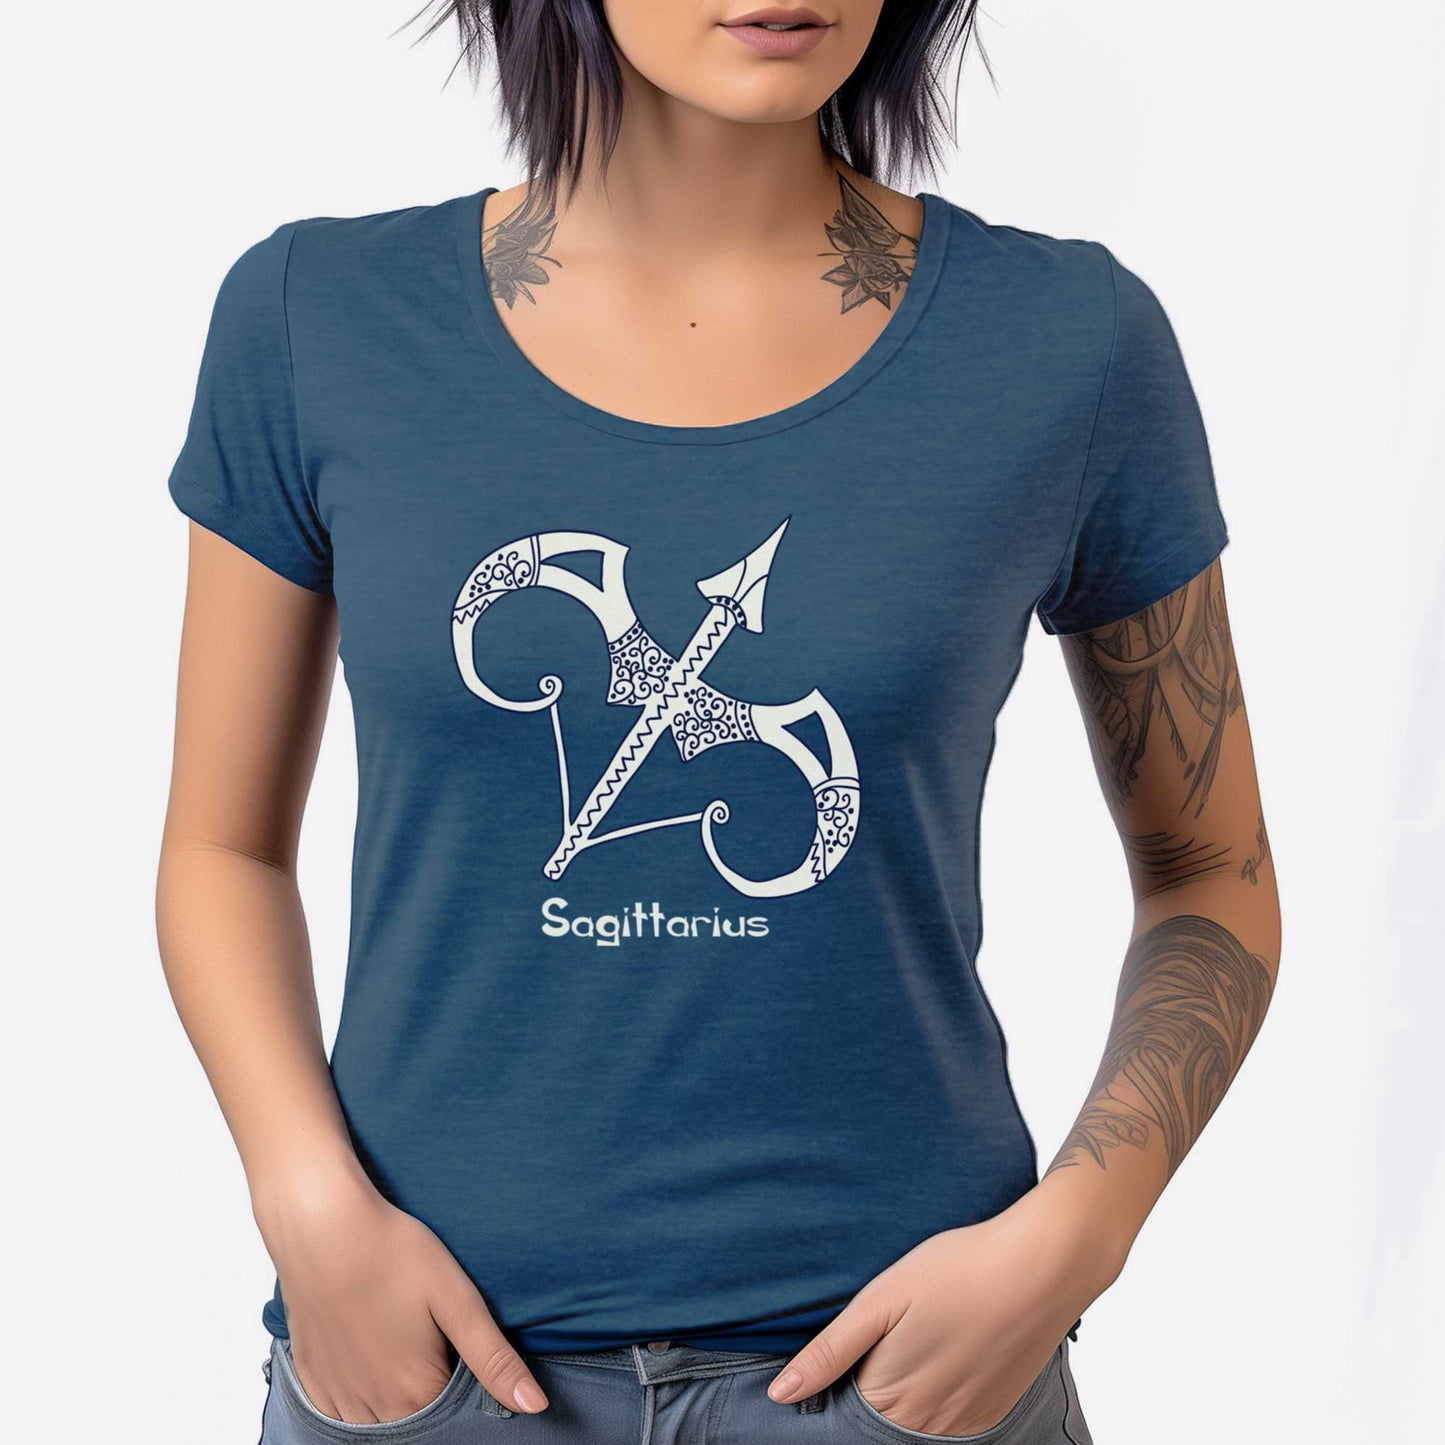 A woman wearing a heathered neptune District 7501 scoop neck t-shirt featuring the zodiac symbol of Sagittarius, the bow and arrow, in a Mediterranean style.